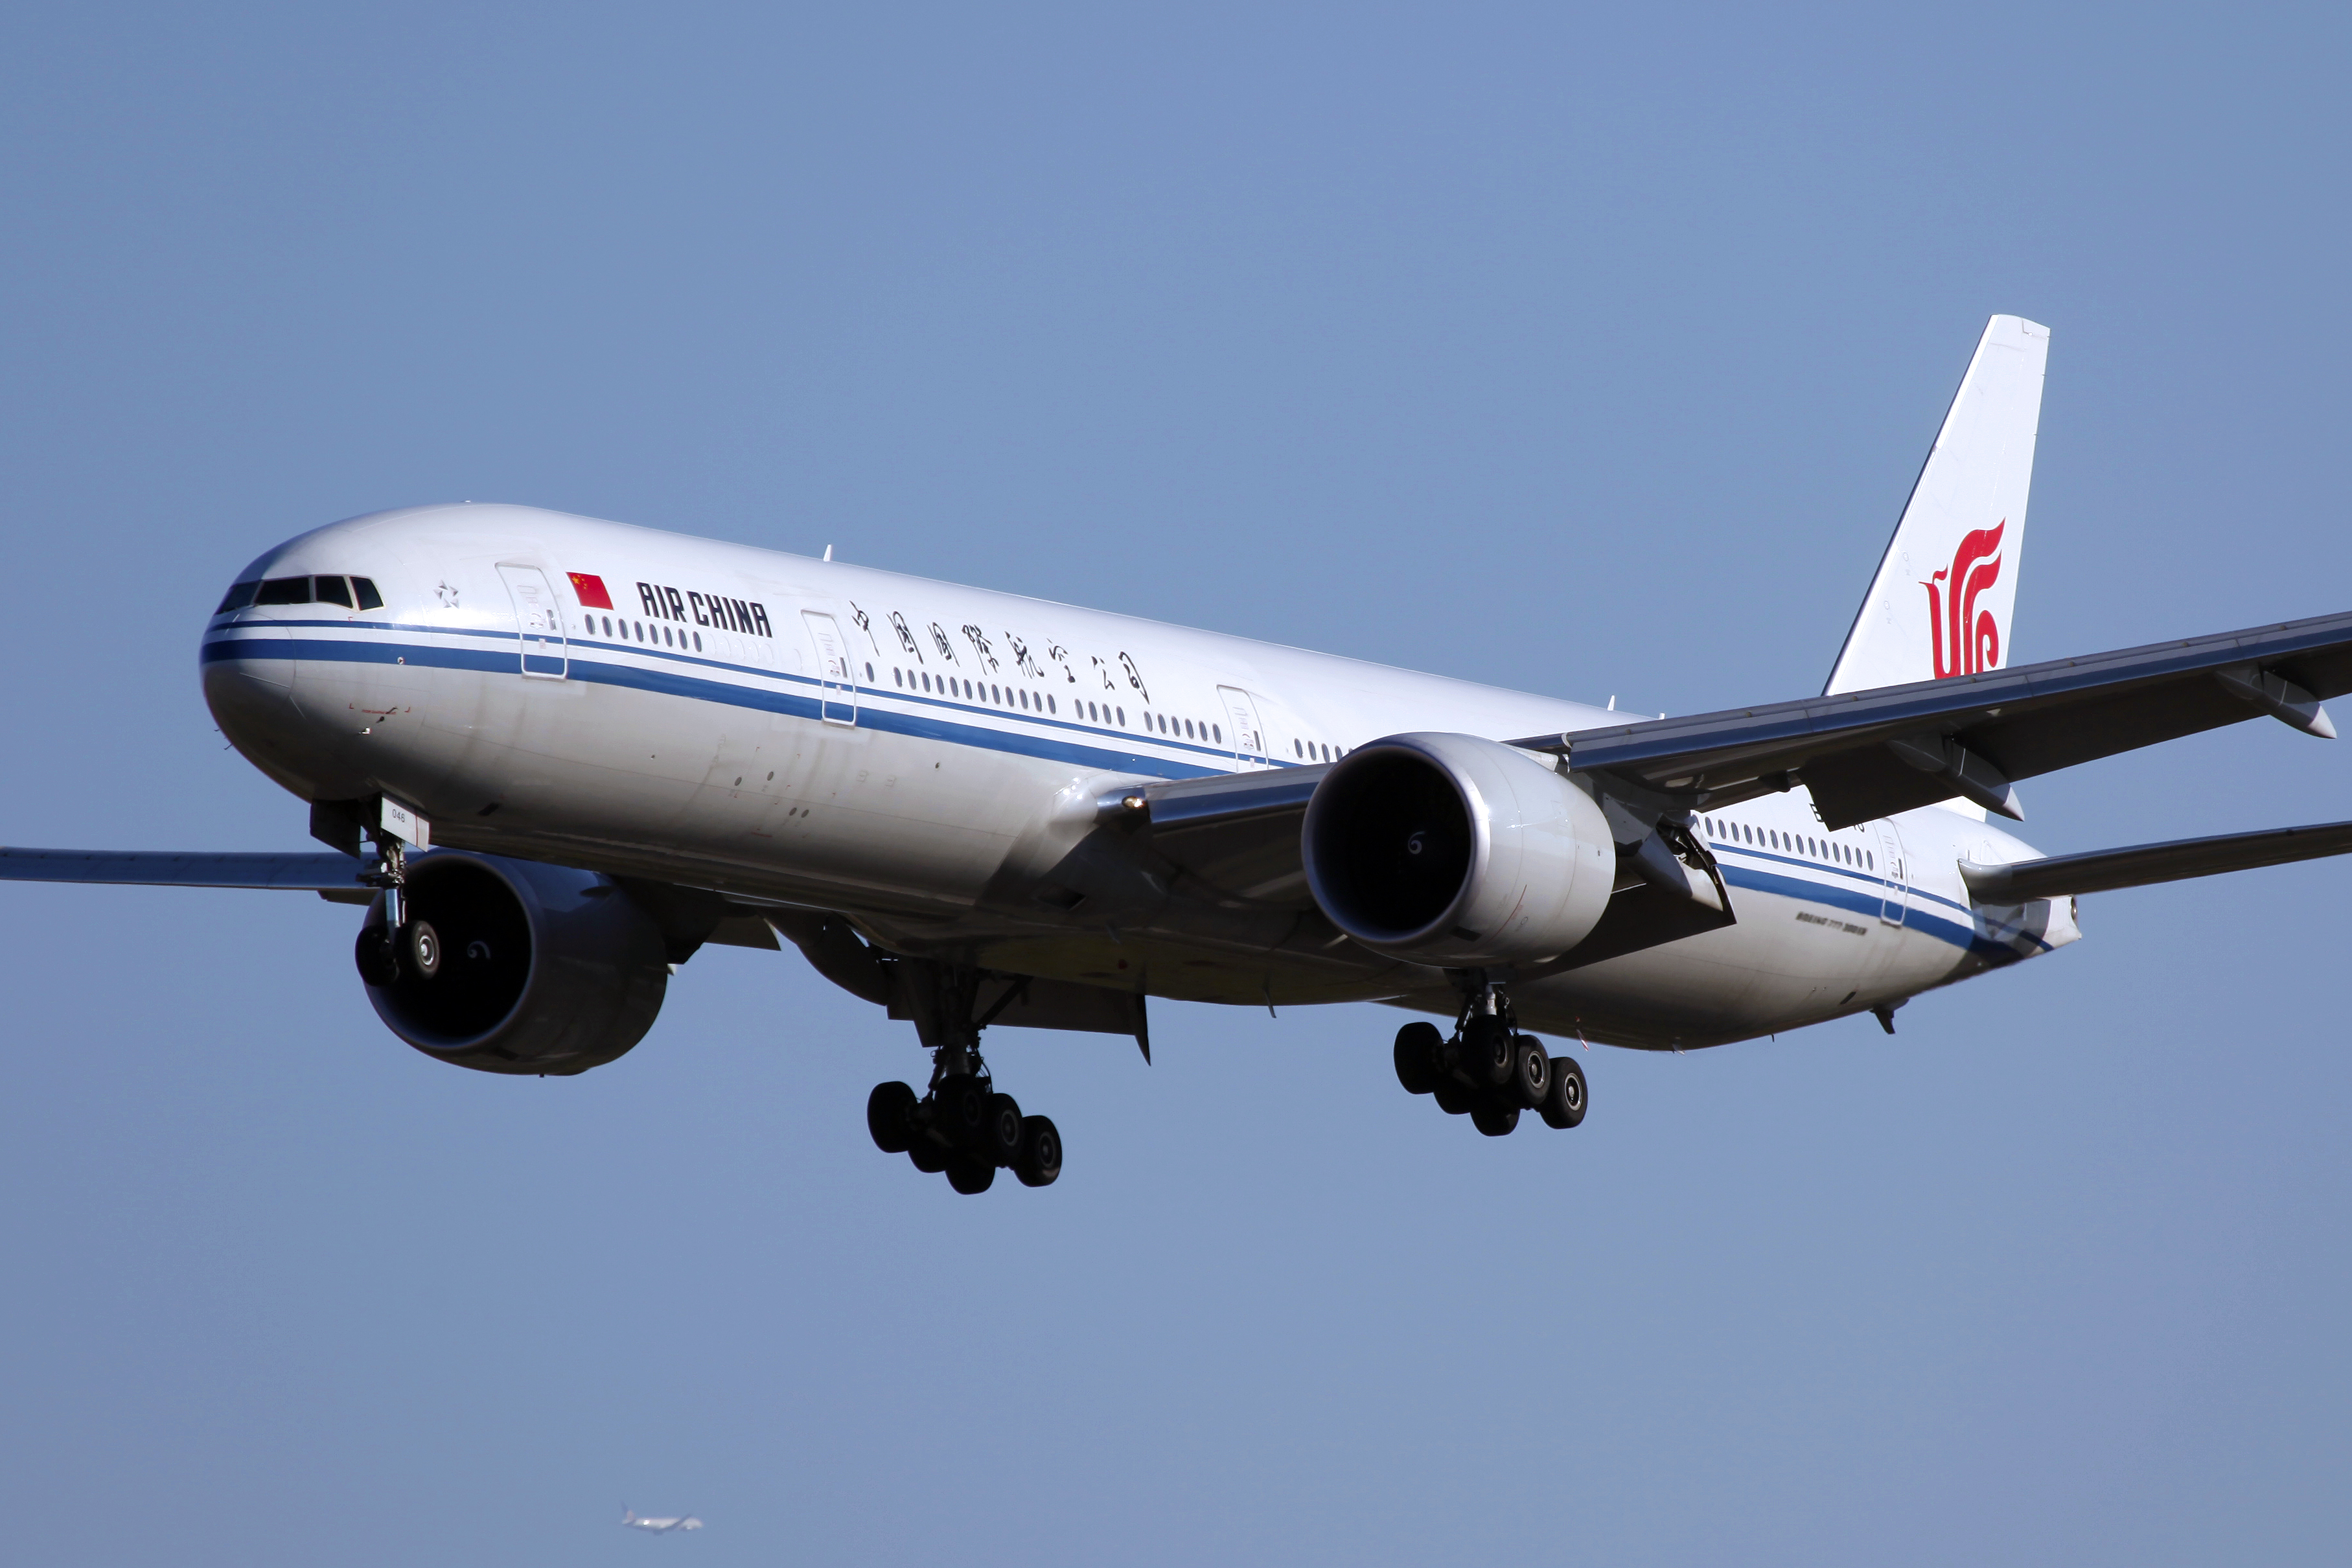 A large Air China jet comes in for a landing with wheels down. The airline is canceling many flights because of COVID restrictions in Shanghai.